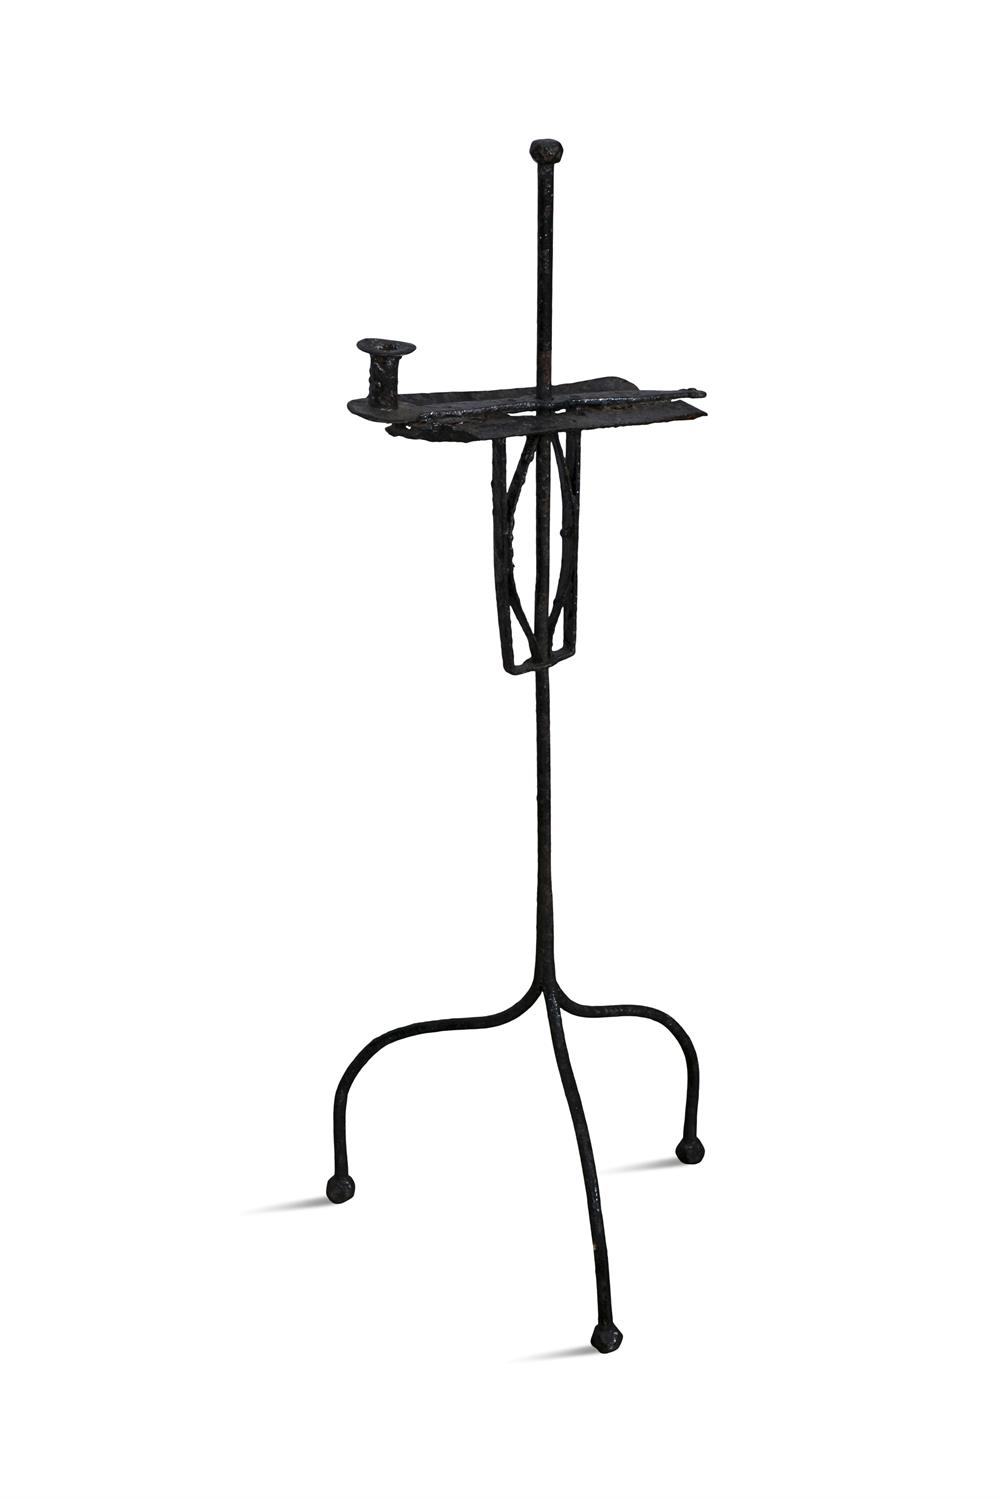 A WROUGHT IRON CANDLE STAND ON TRIPOD BASE, 109cm high - Image 2 of 3